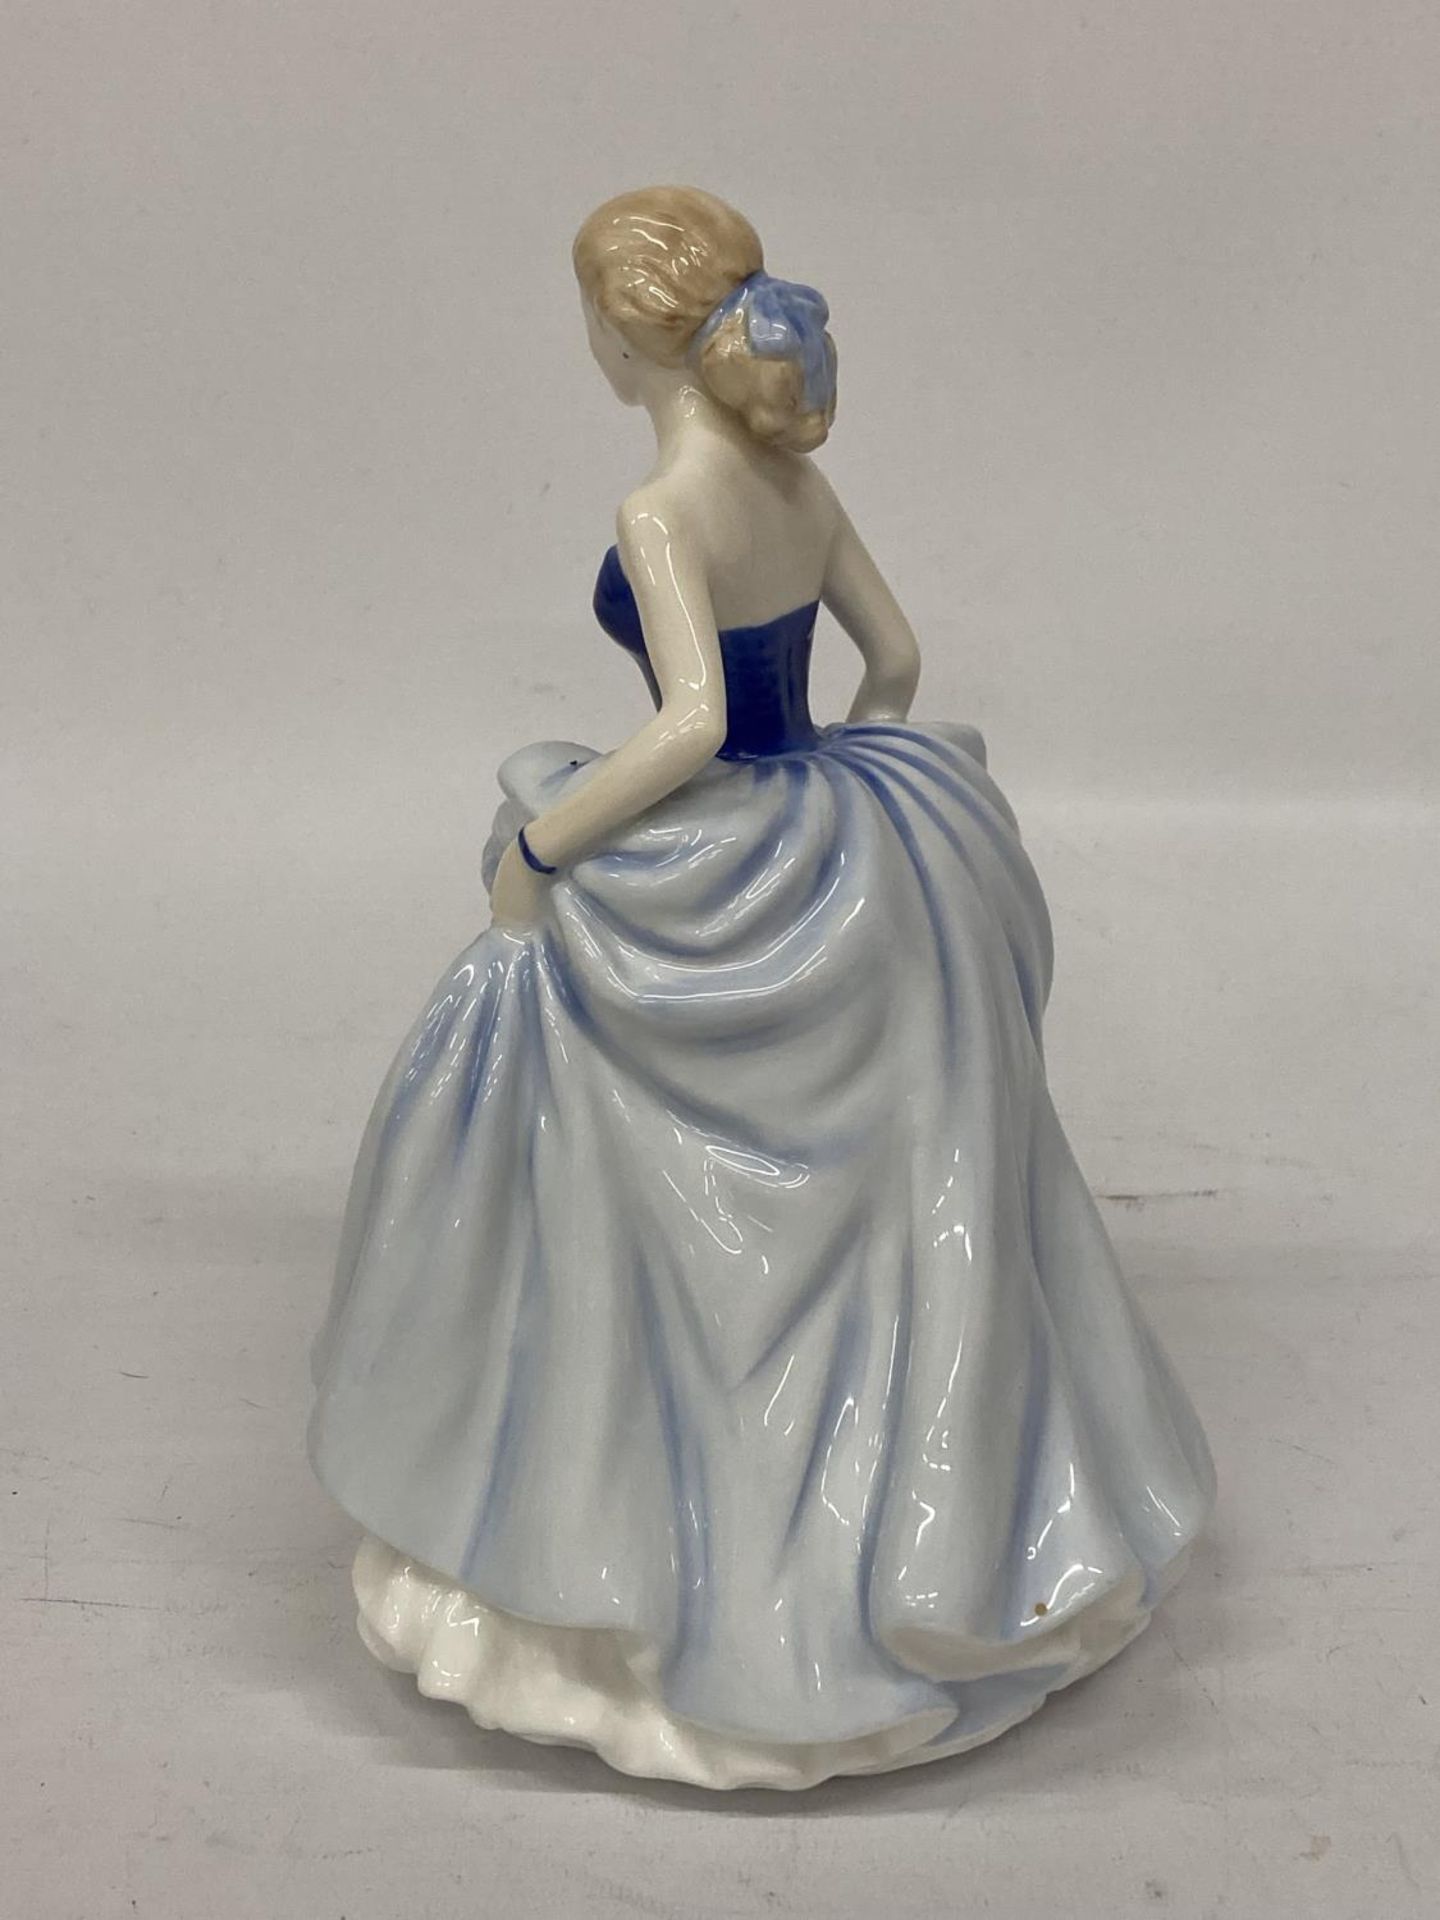 A ROYAL DOULTON FIGURINE FROM THE PRETTY LADIES COLLECTION "FIGURE OF THE YEAR 2004 SUSAN" HN4532 - Image 3 of 4